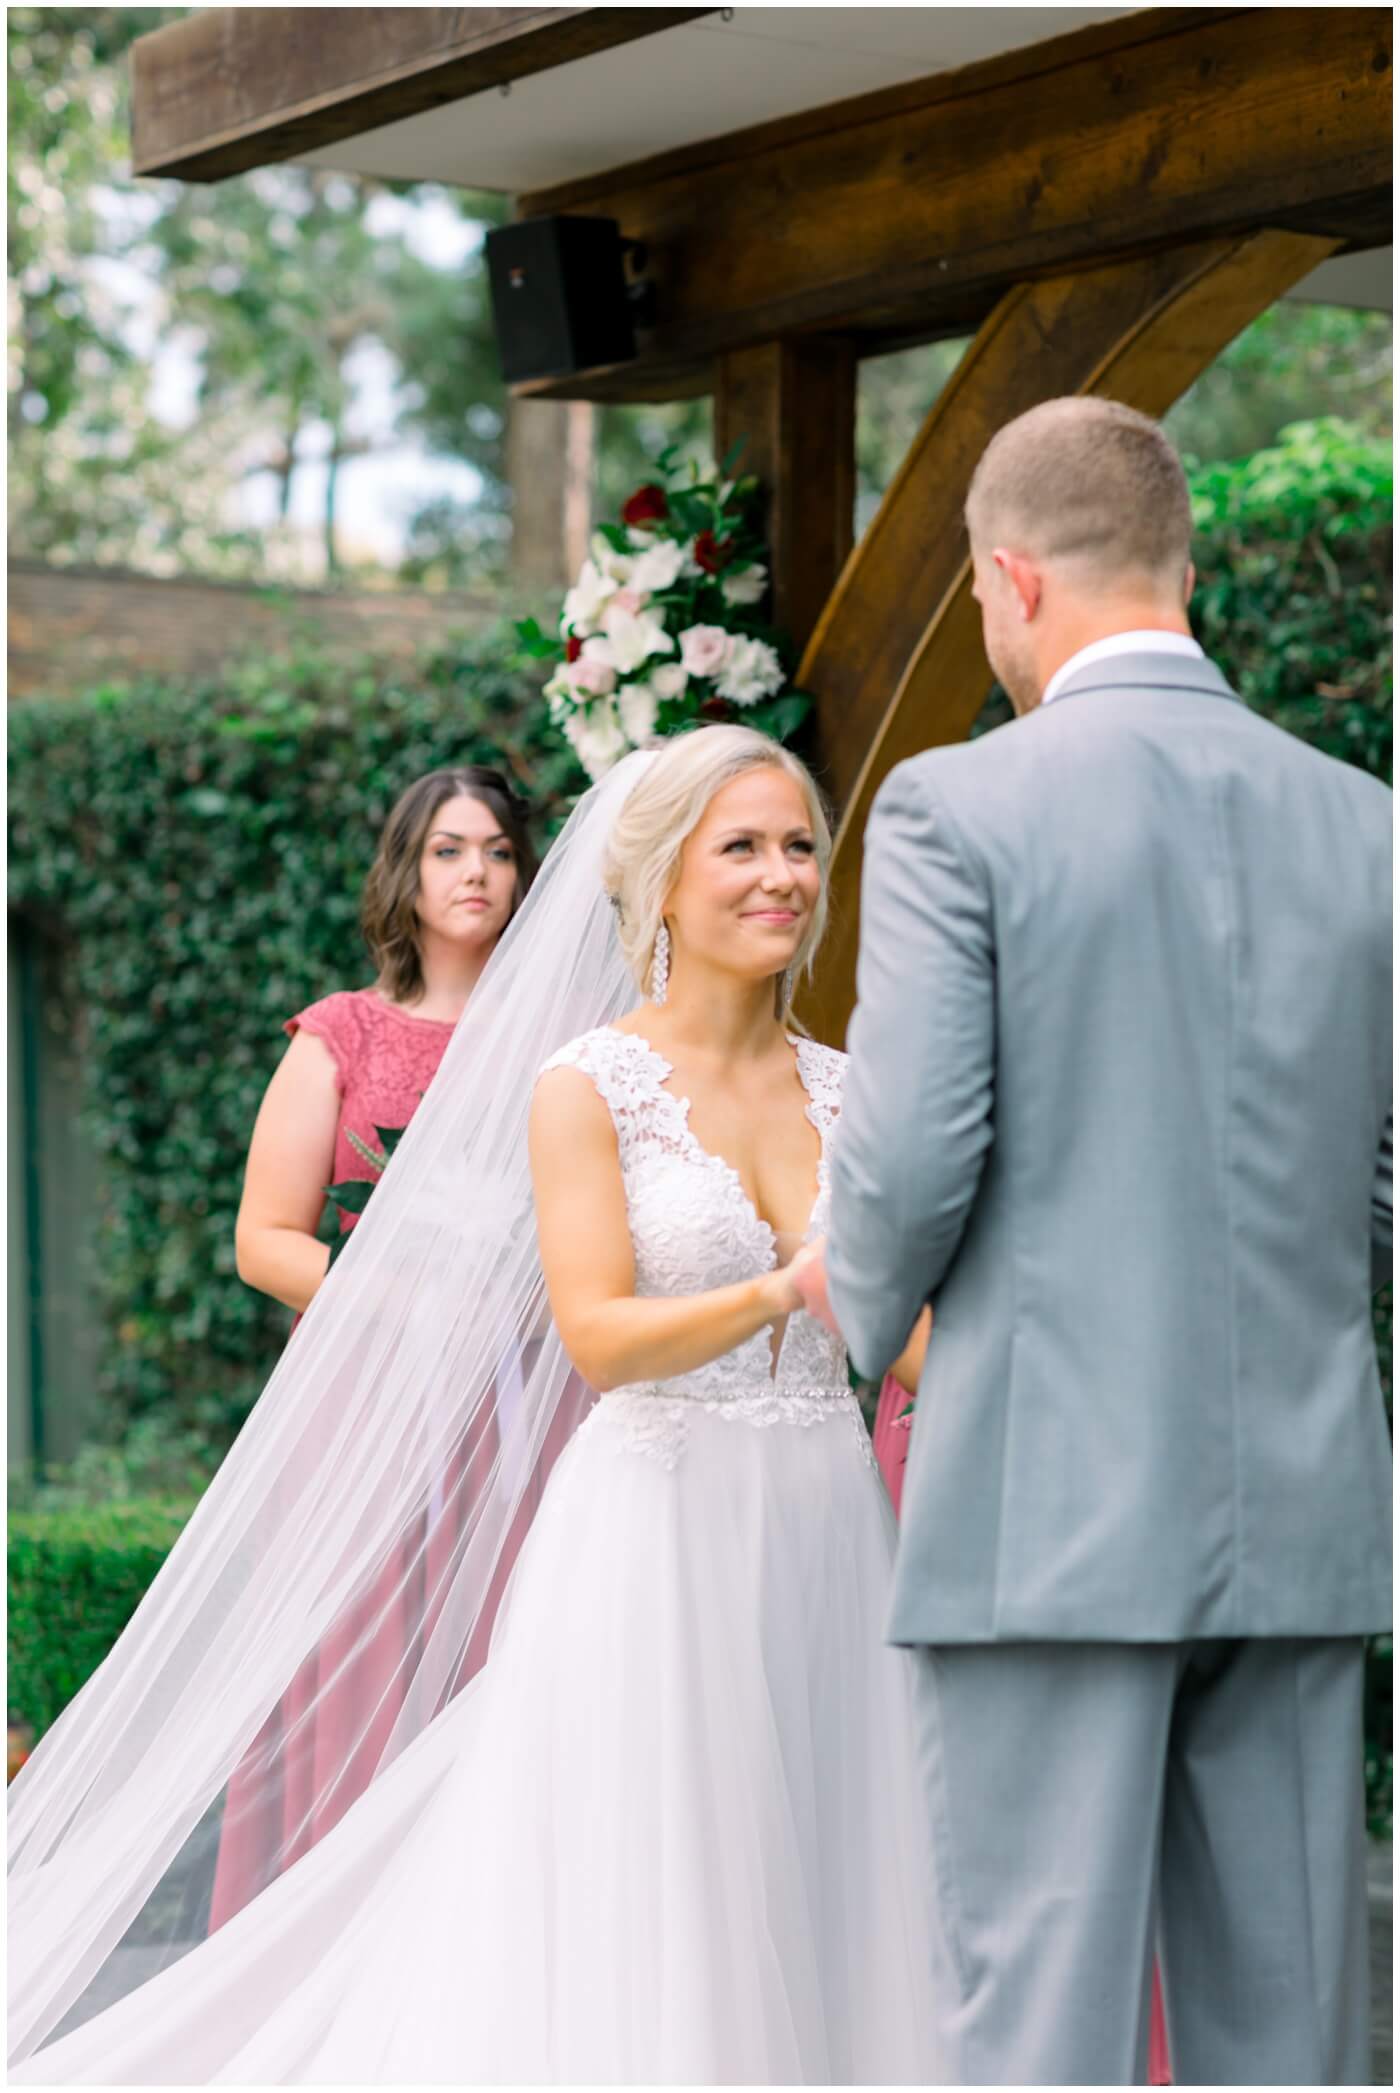 the bride smiles at her groom during the wedding ceremony in houston